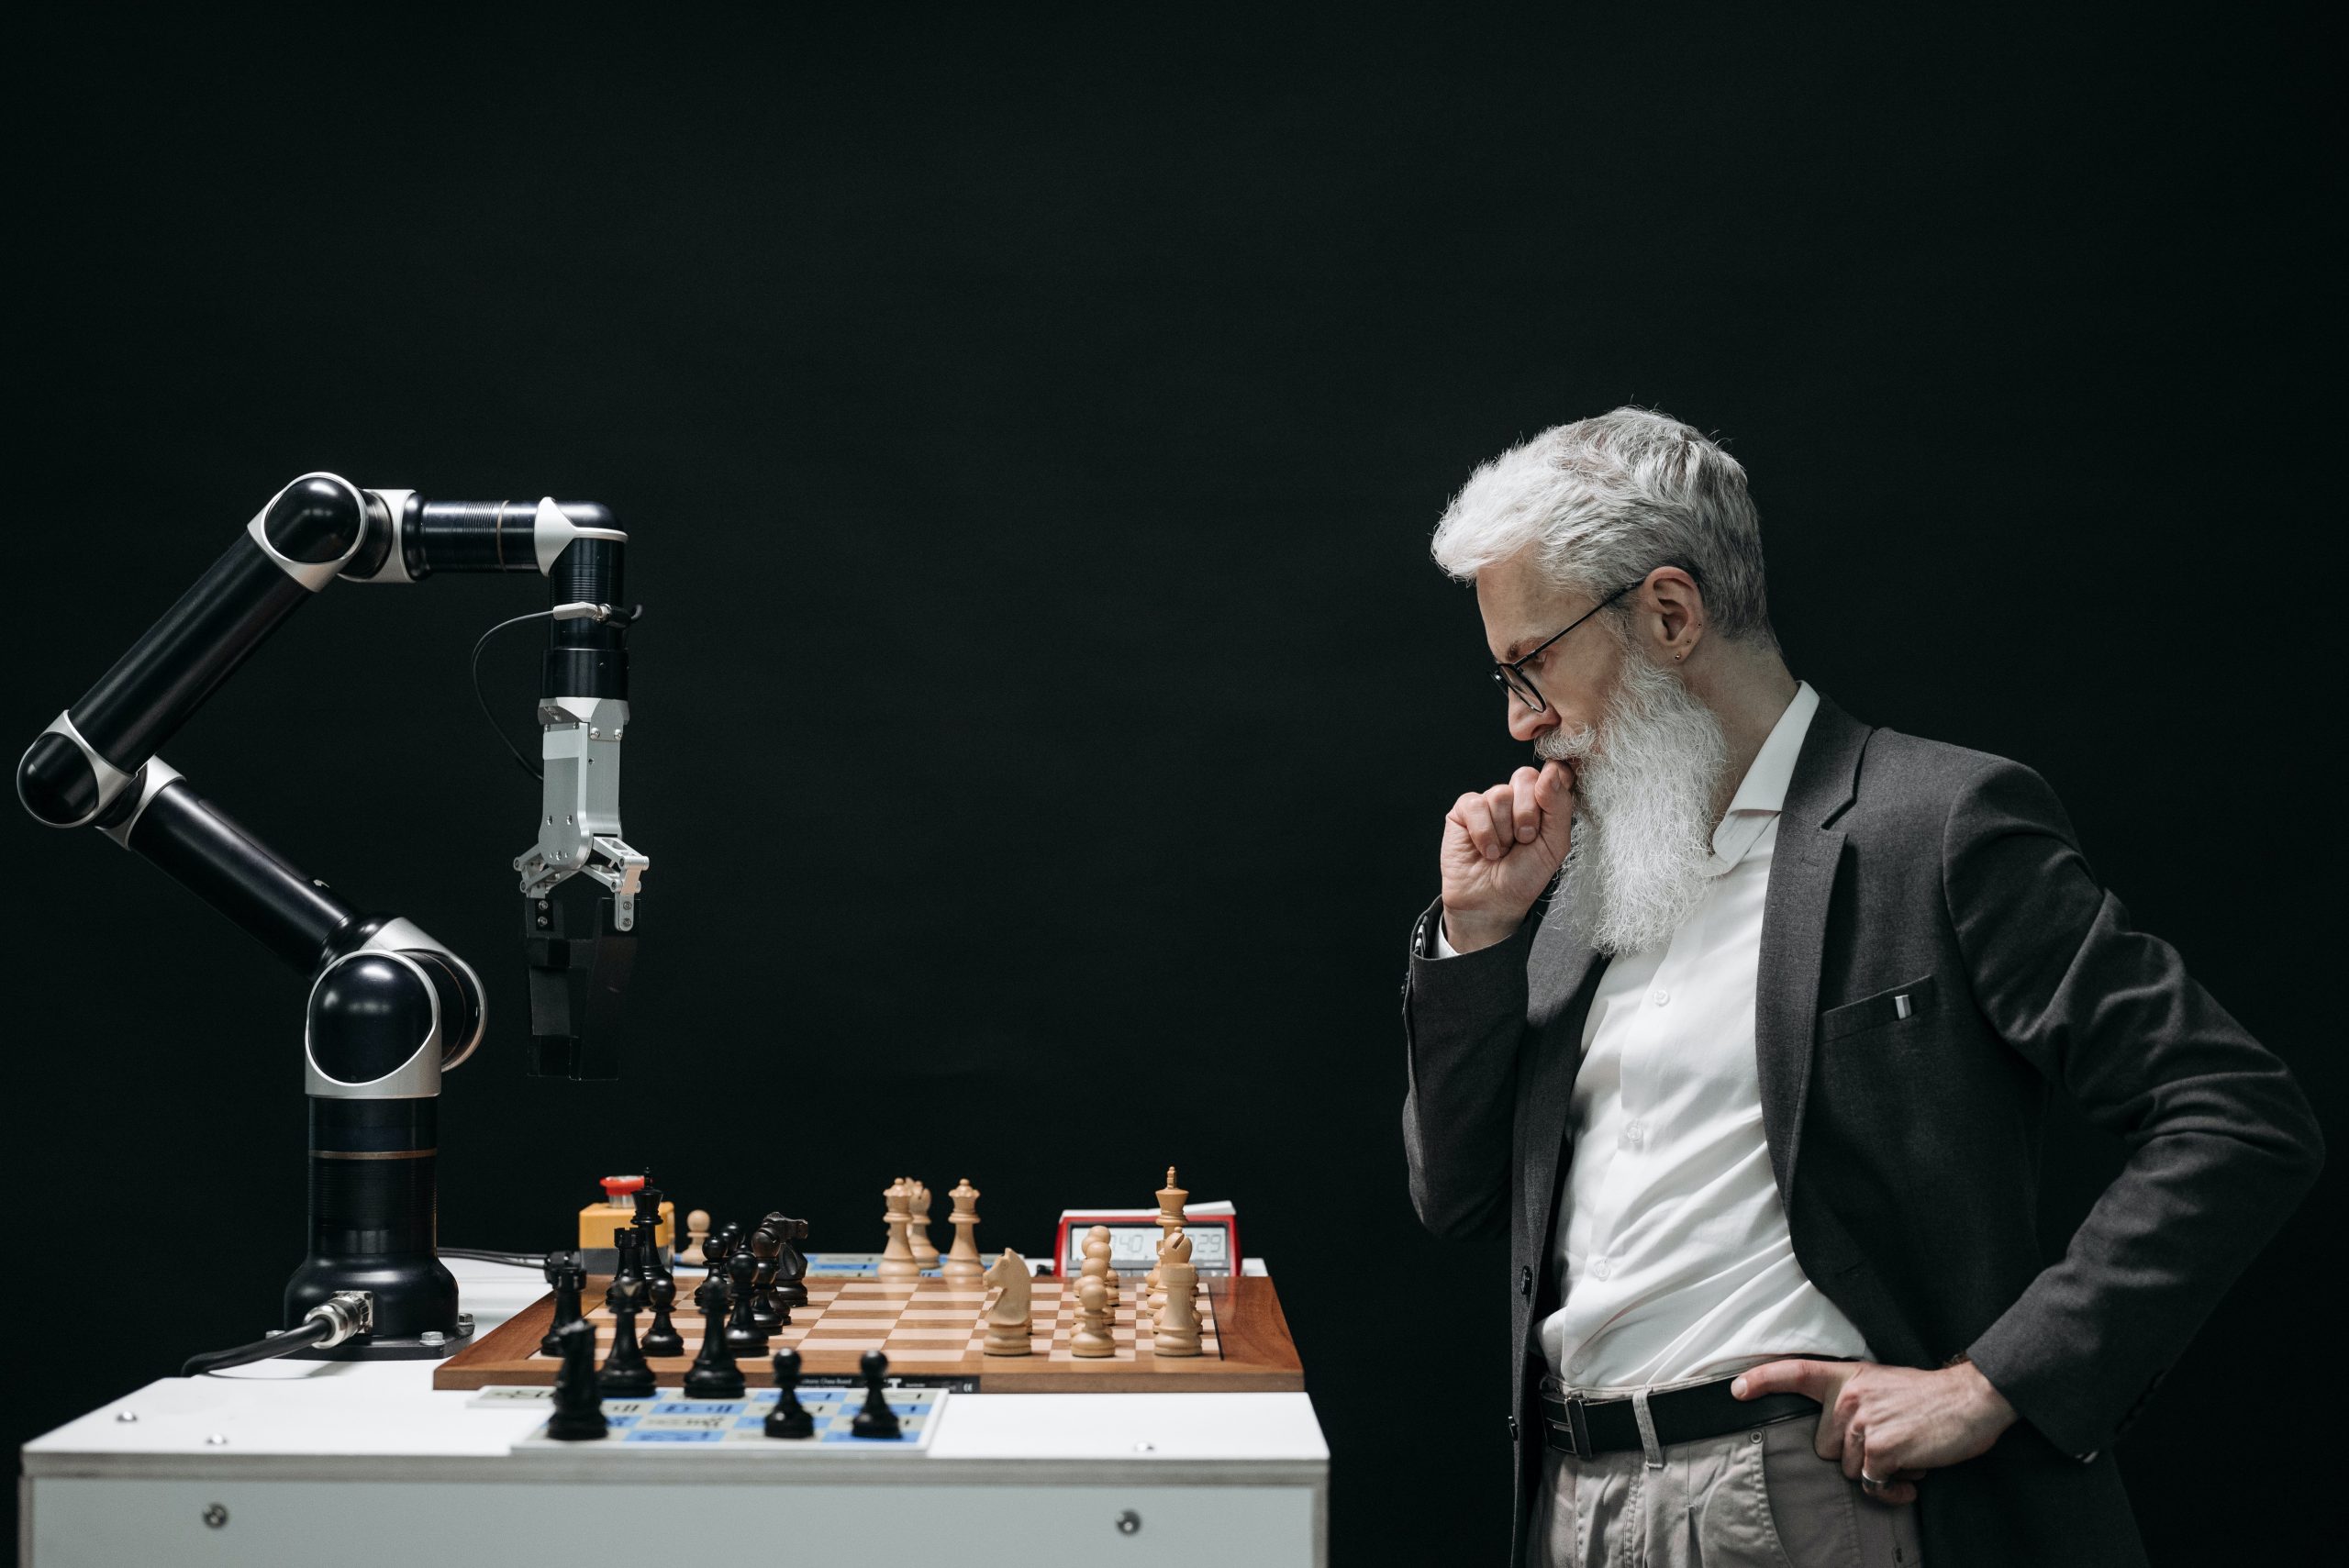 machine learning and playing chess with a human. this is the future